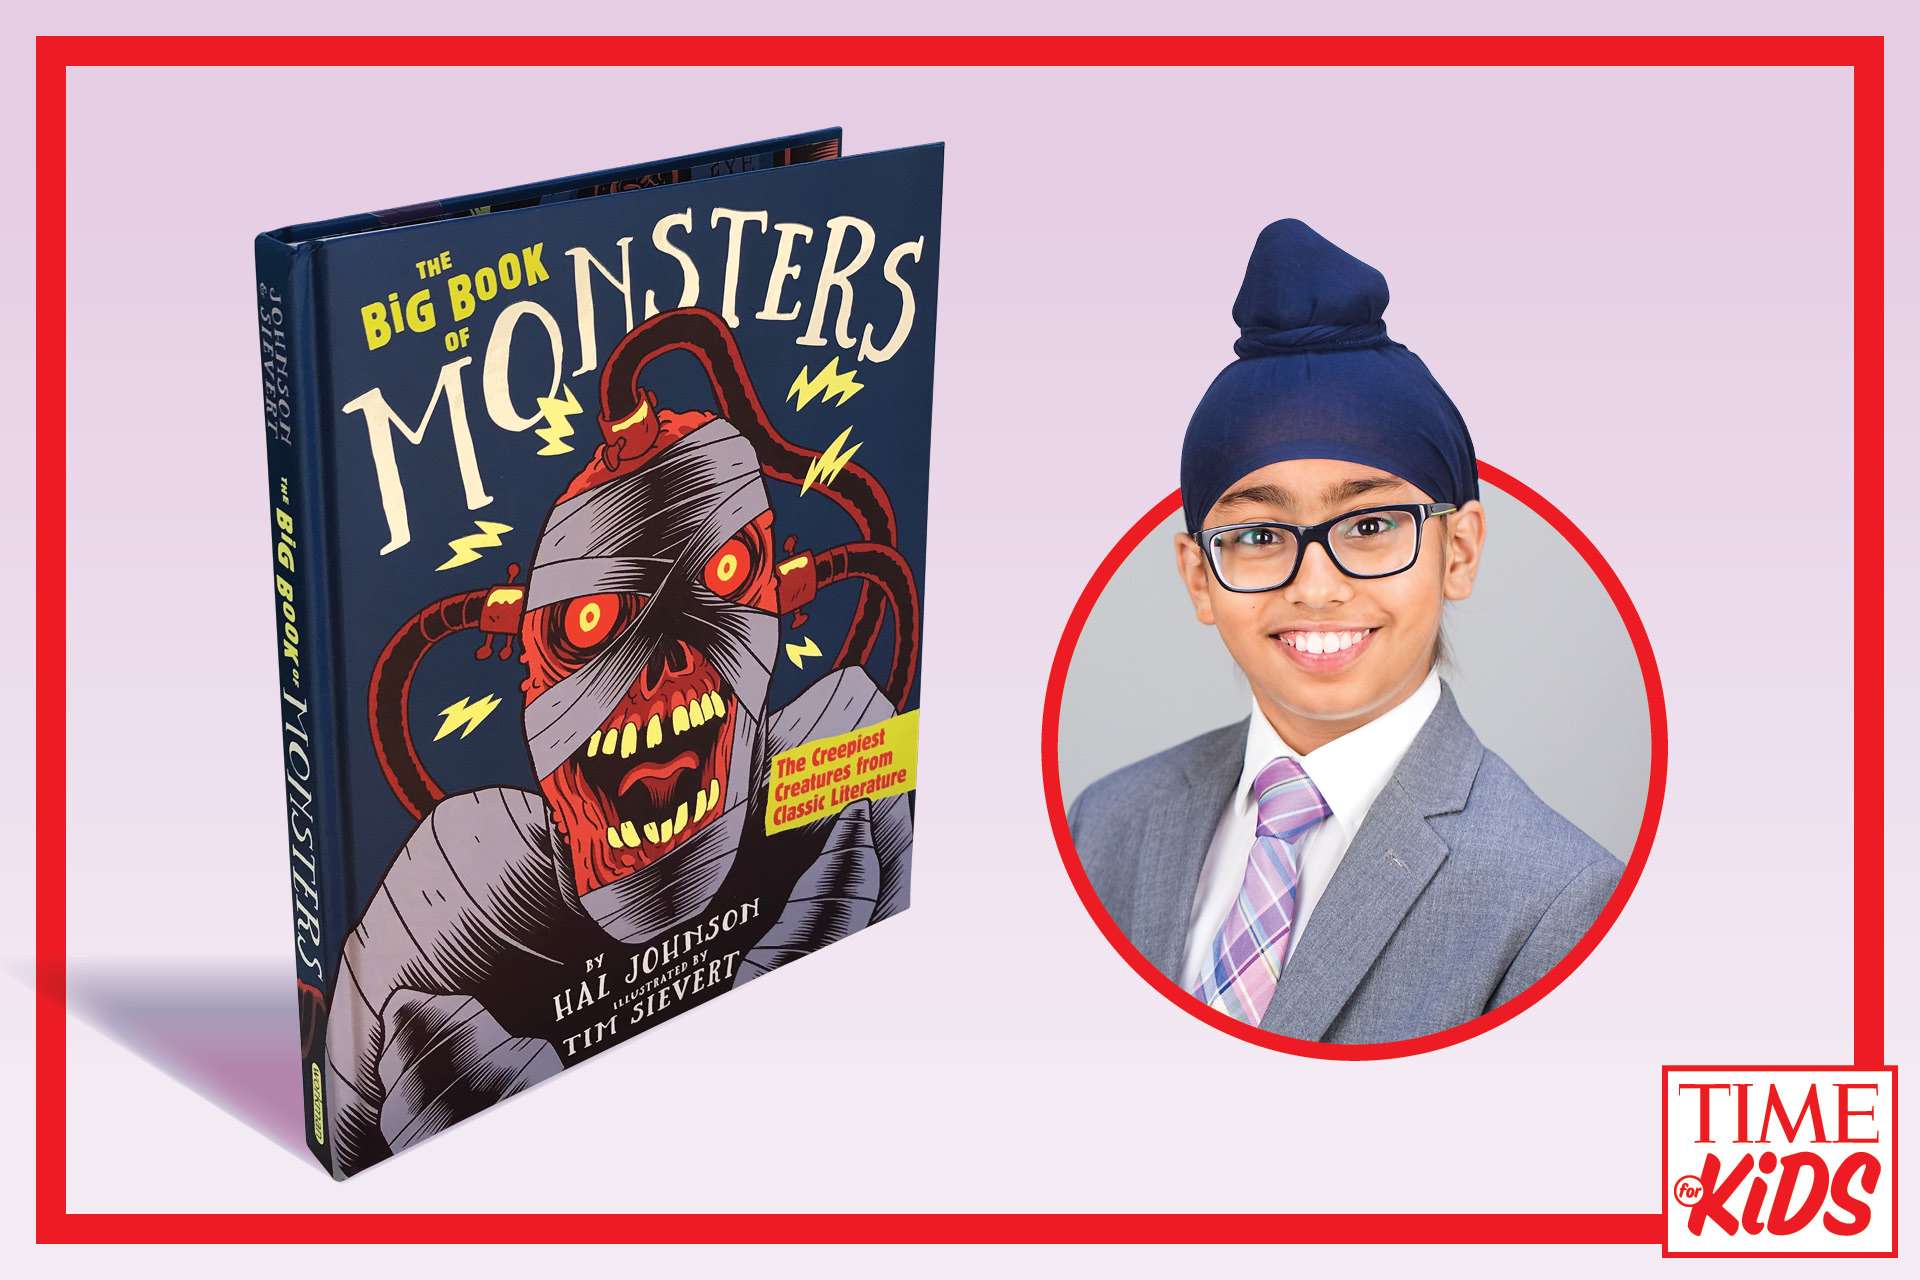 TFK Kid Reporter Raunak Singh Reviews The Big Book of Monsters by Hal Johnson illustrated by Tim Sievert